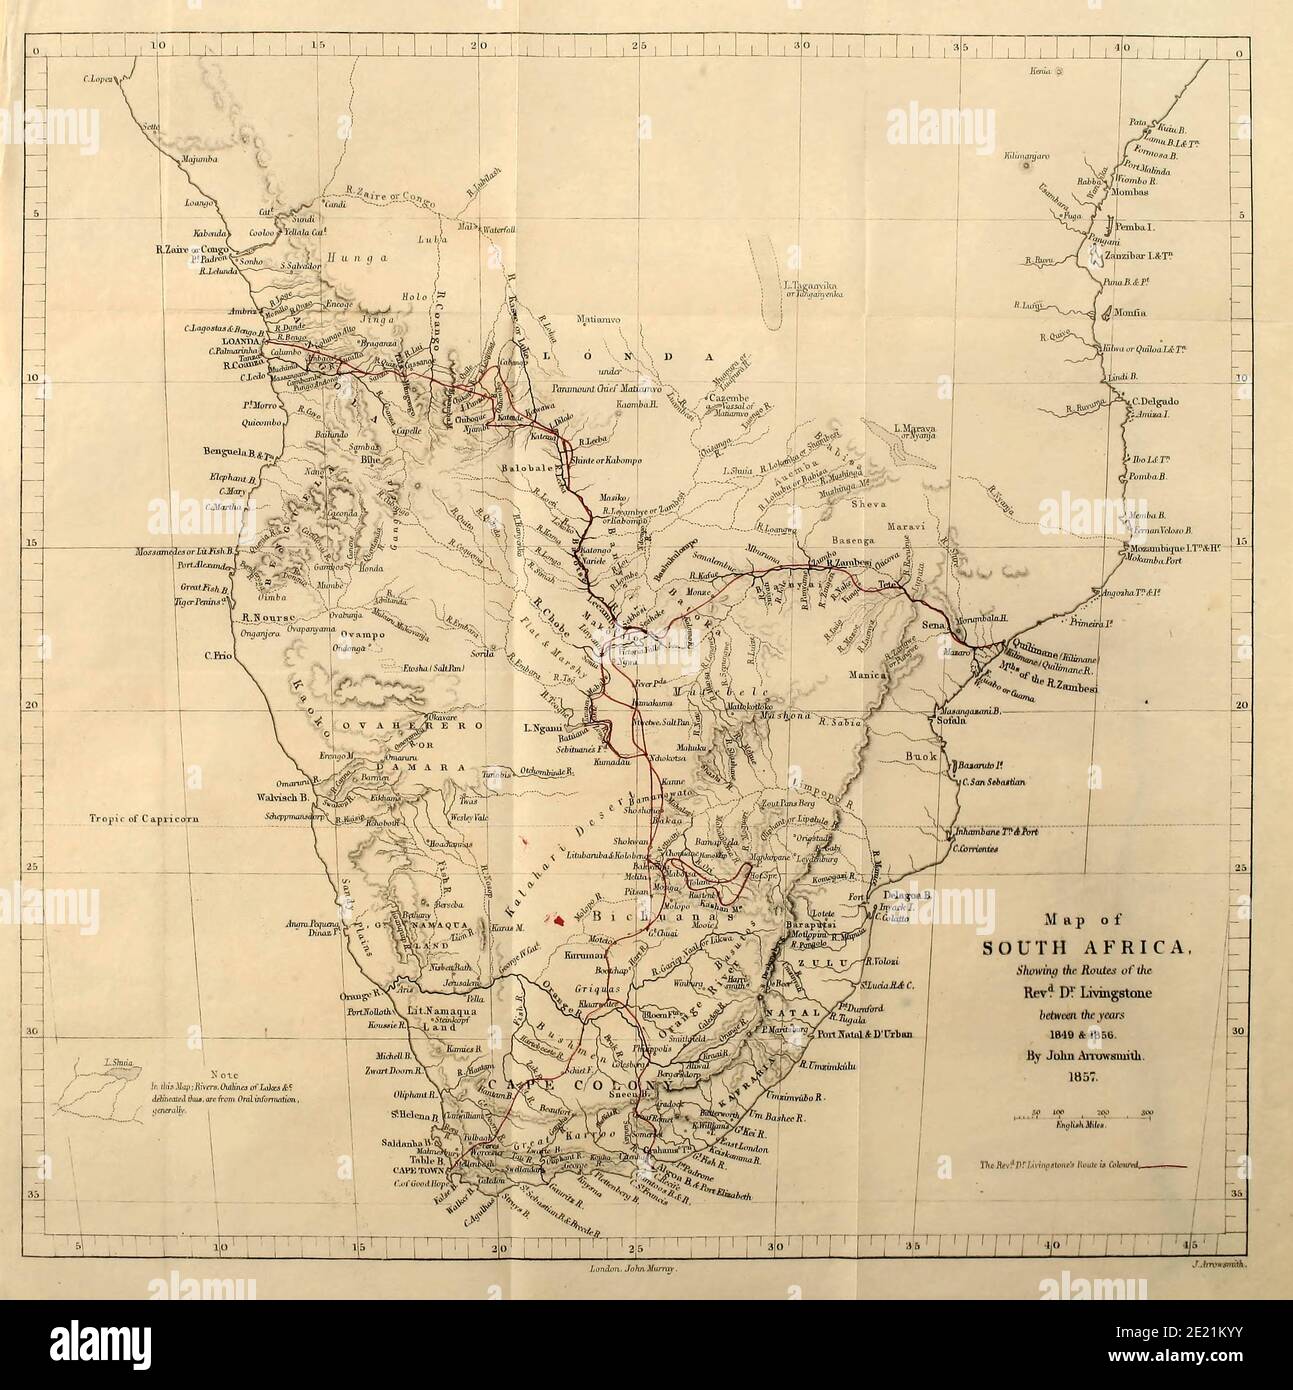 Map of South Africa showing Dr. Livingstone's Route From book ' Missionary travels and researches in South Africa : including a sketch of sixteen years' residence in the interior of Africa, and a journey from the Cape of Good Hope to Loanda, on the west coast, thence across the continent, down the river Zambesi, to the eastern ocean ' by David Livingstone Published in London in 1857 Stock Photo